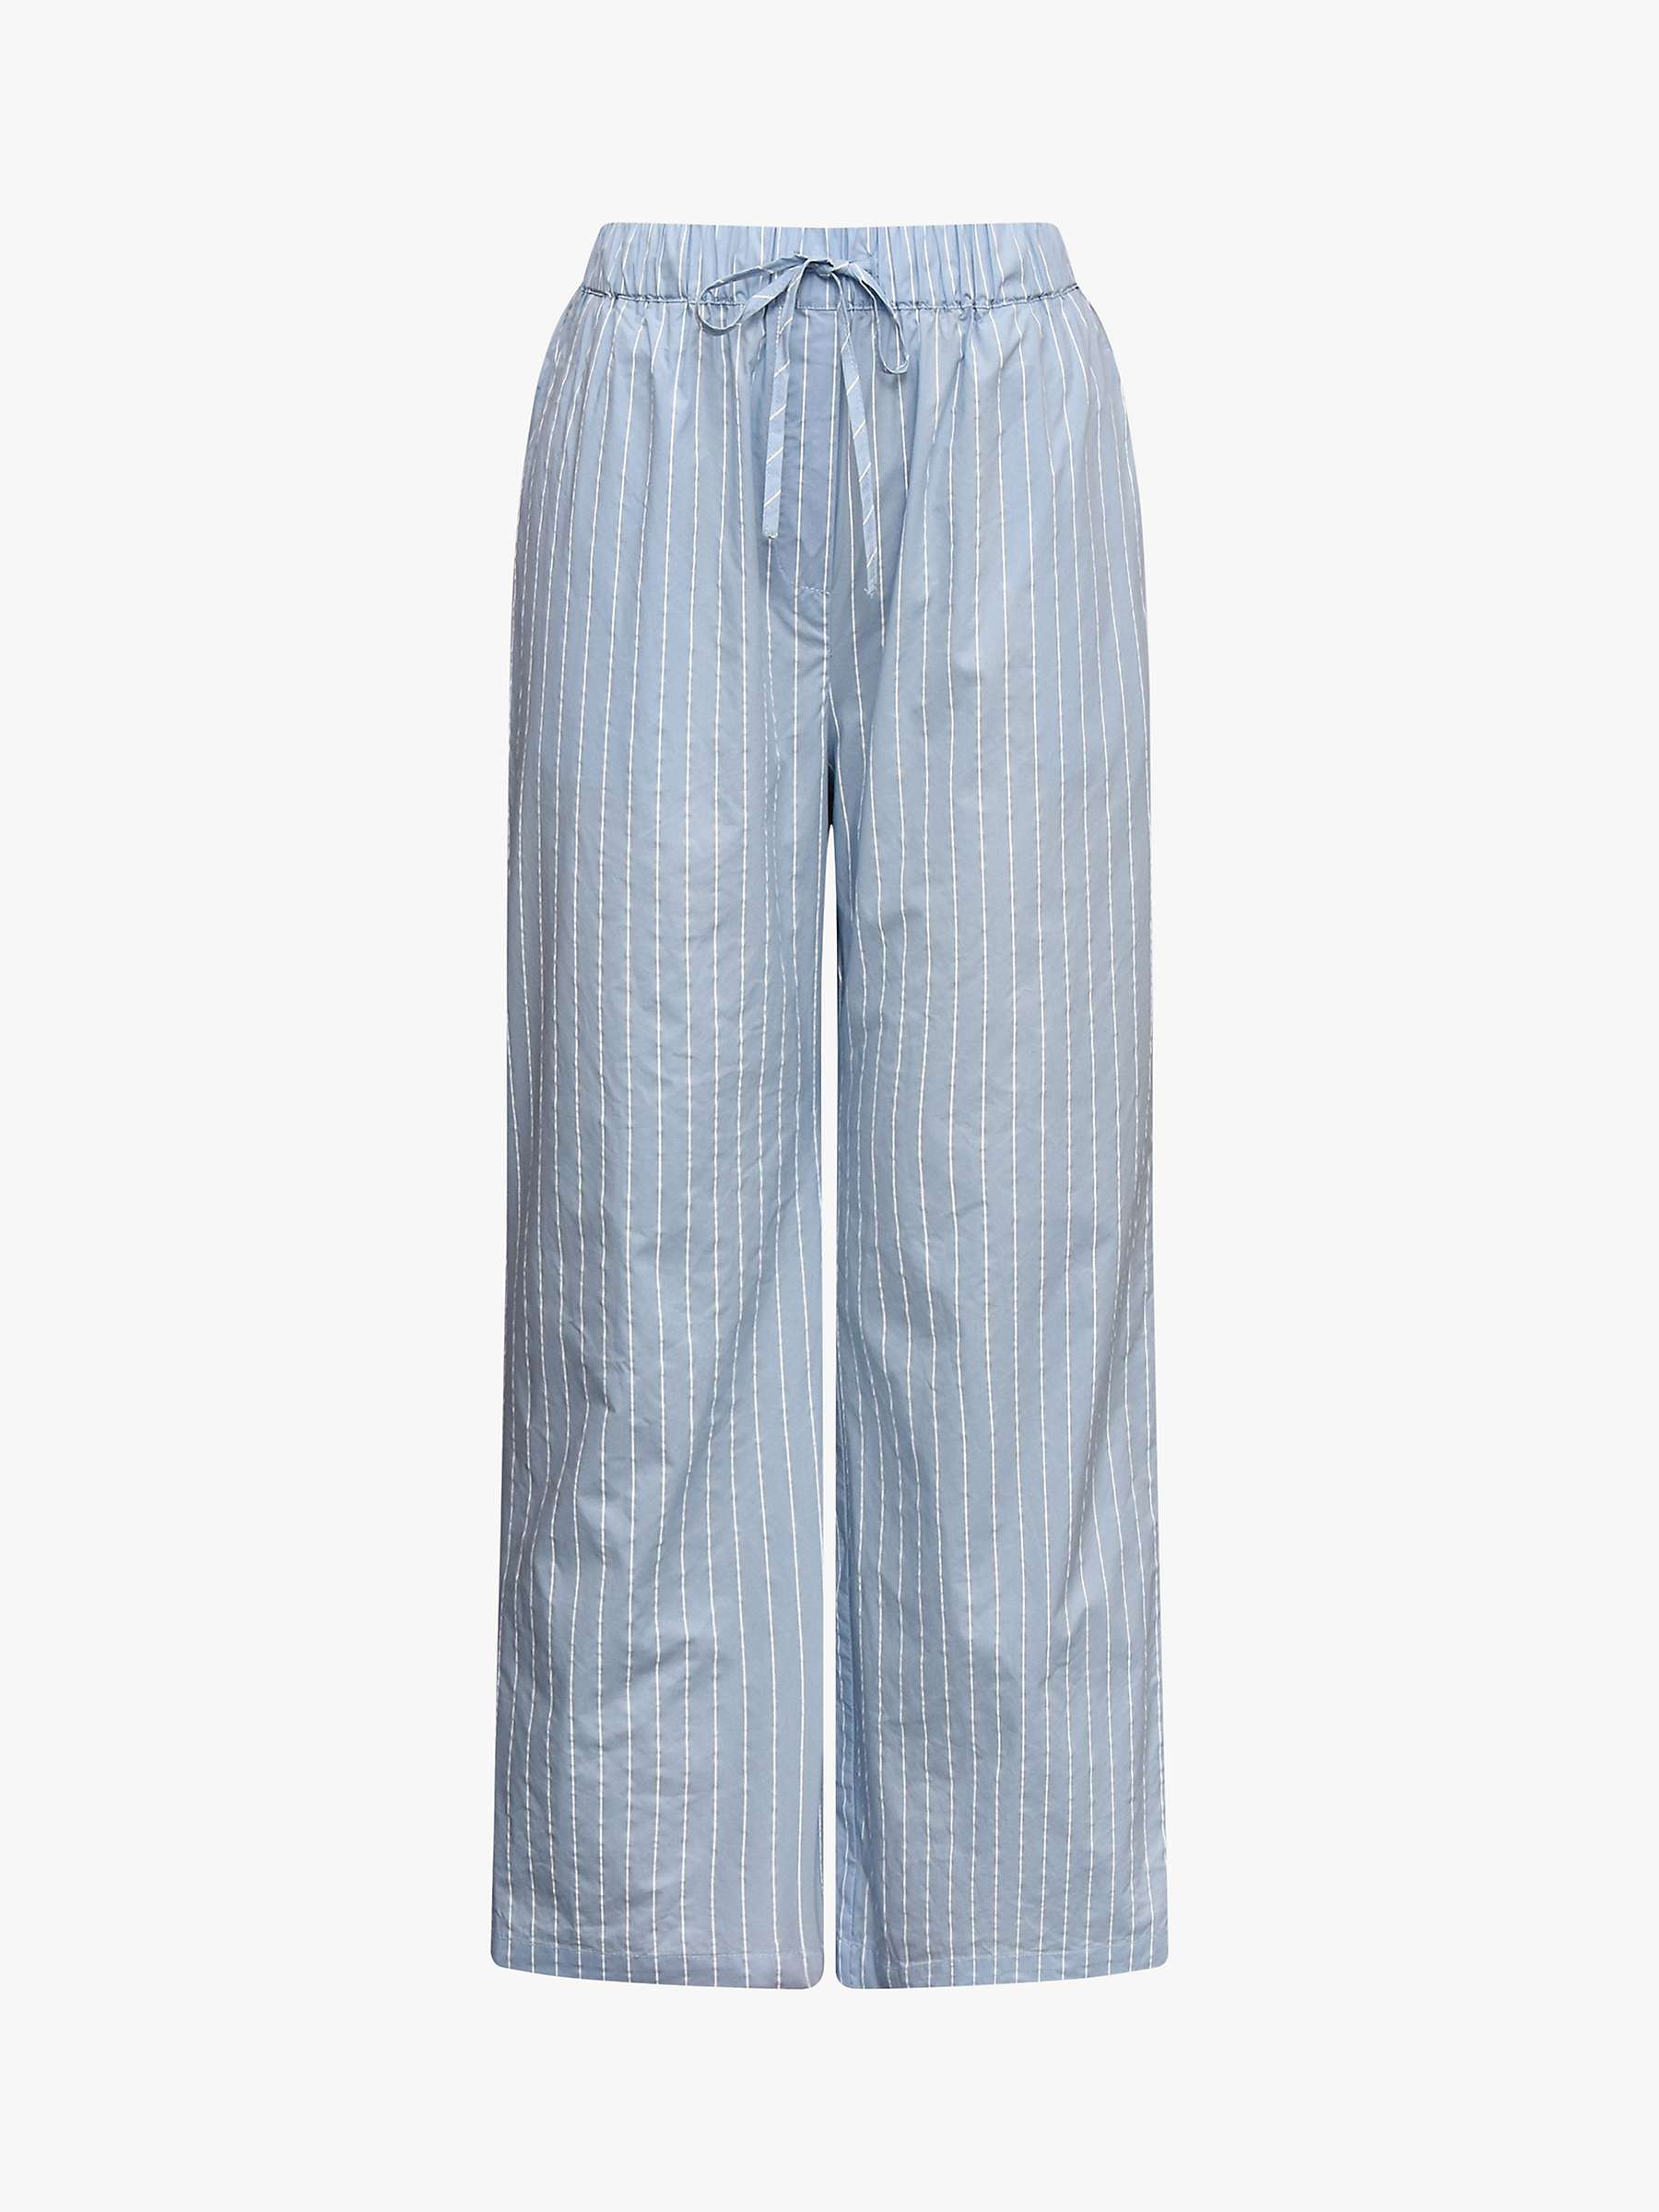 Buy A-VIEW Brenda Trousers Online at johnlewis.com